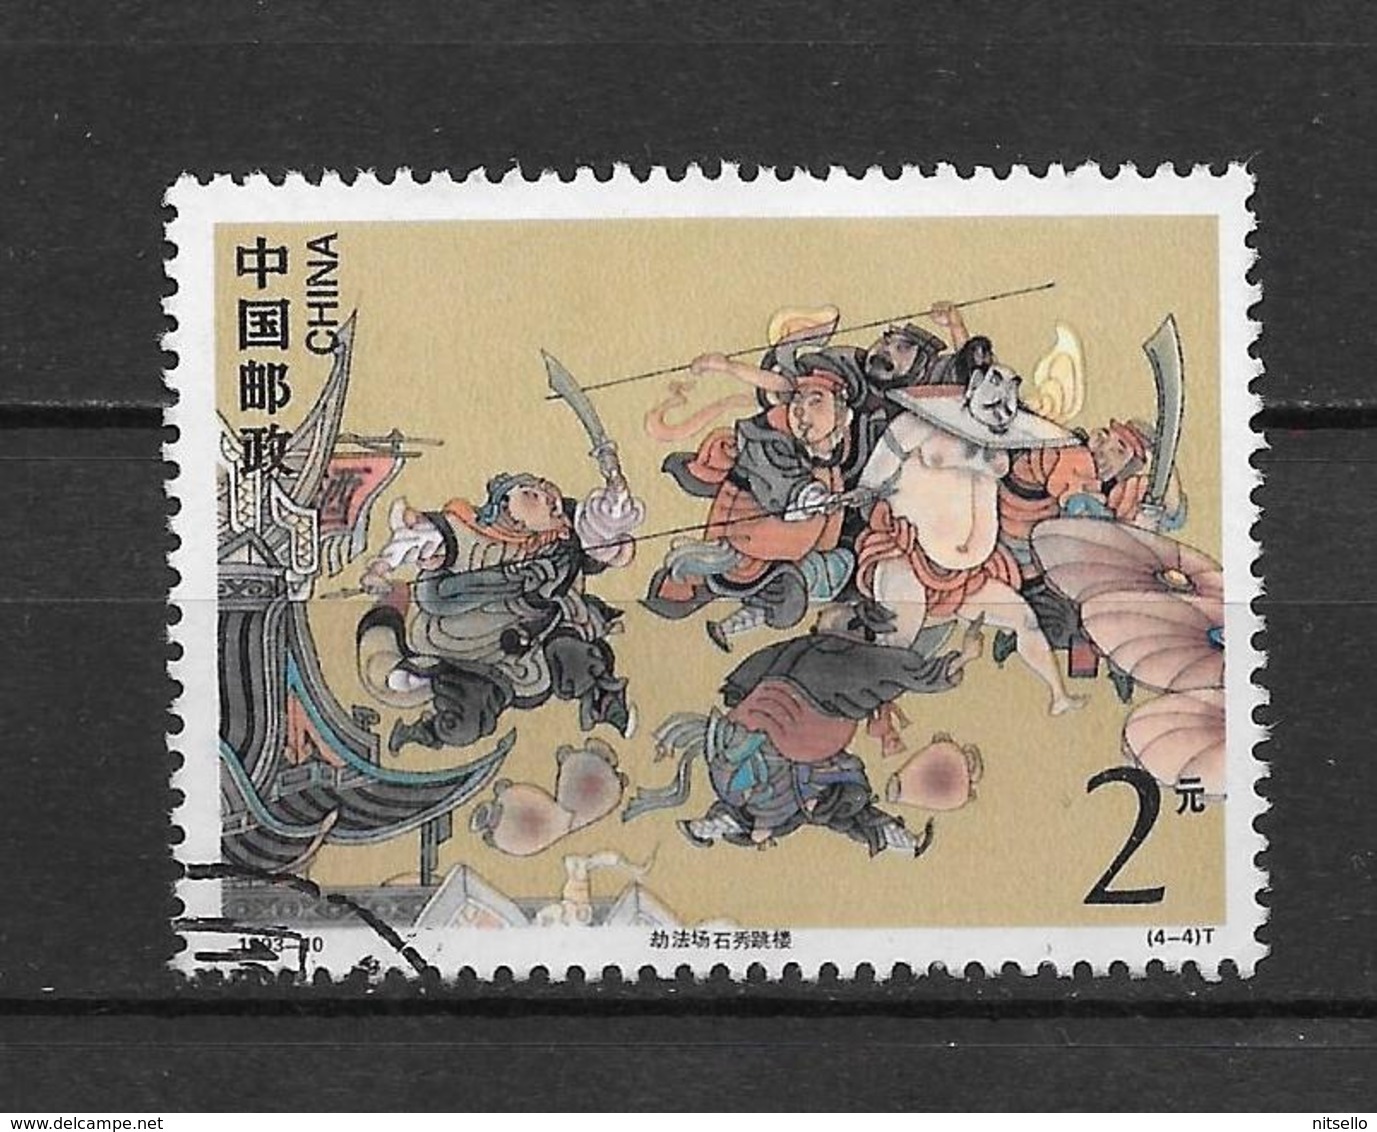 LOTE 1799  ///  (C020)  CHINA  1993   MICHEL Nº: 2486  LUXE - Used Stamps